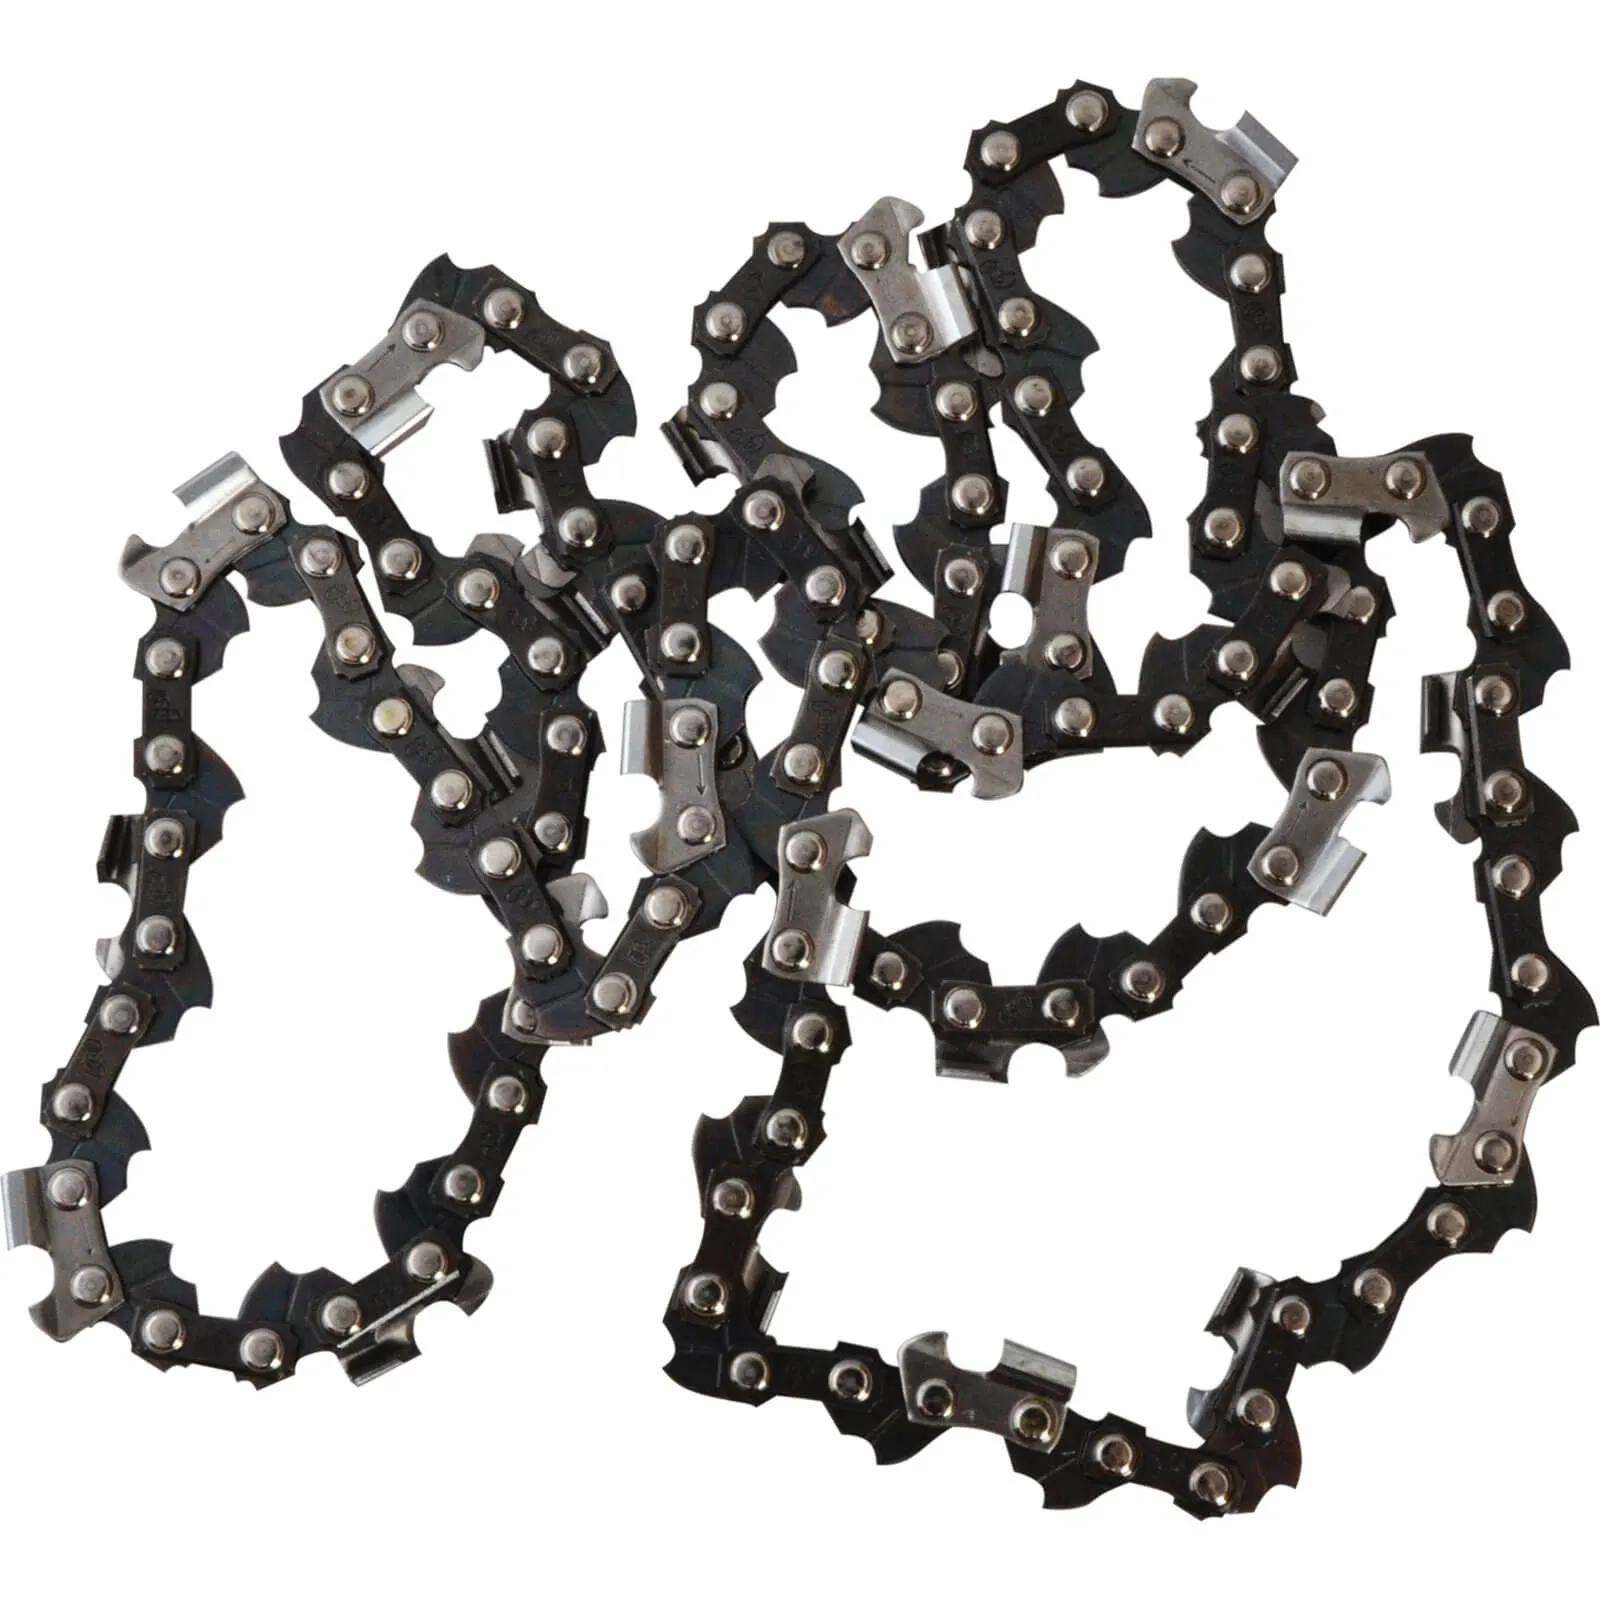 ALM Chainsaw Chain 3/8" x 61 Links for 450mm Bar on the Aldi Gardenline GLPCS/10 - 450mm